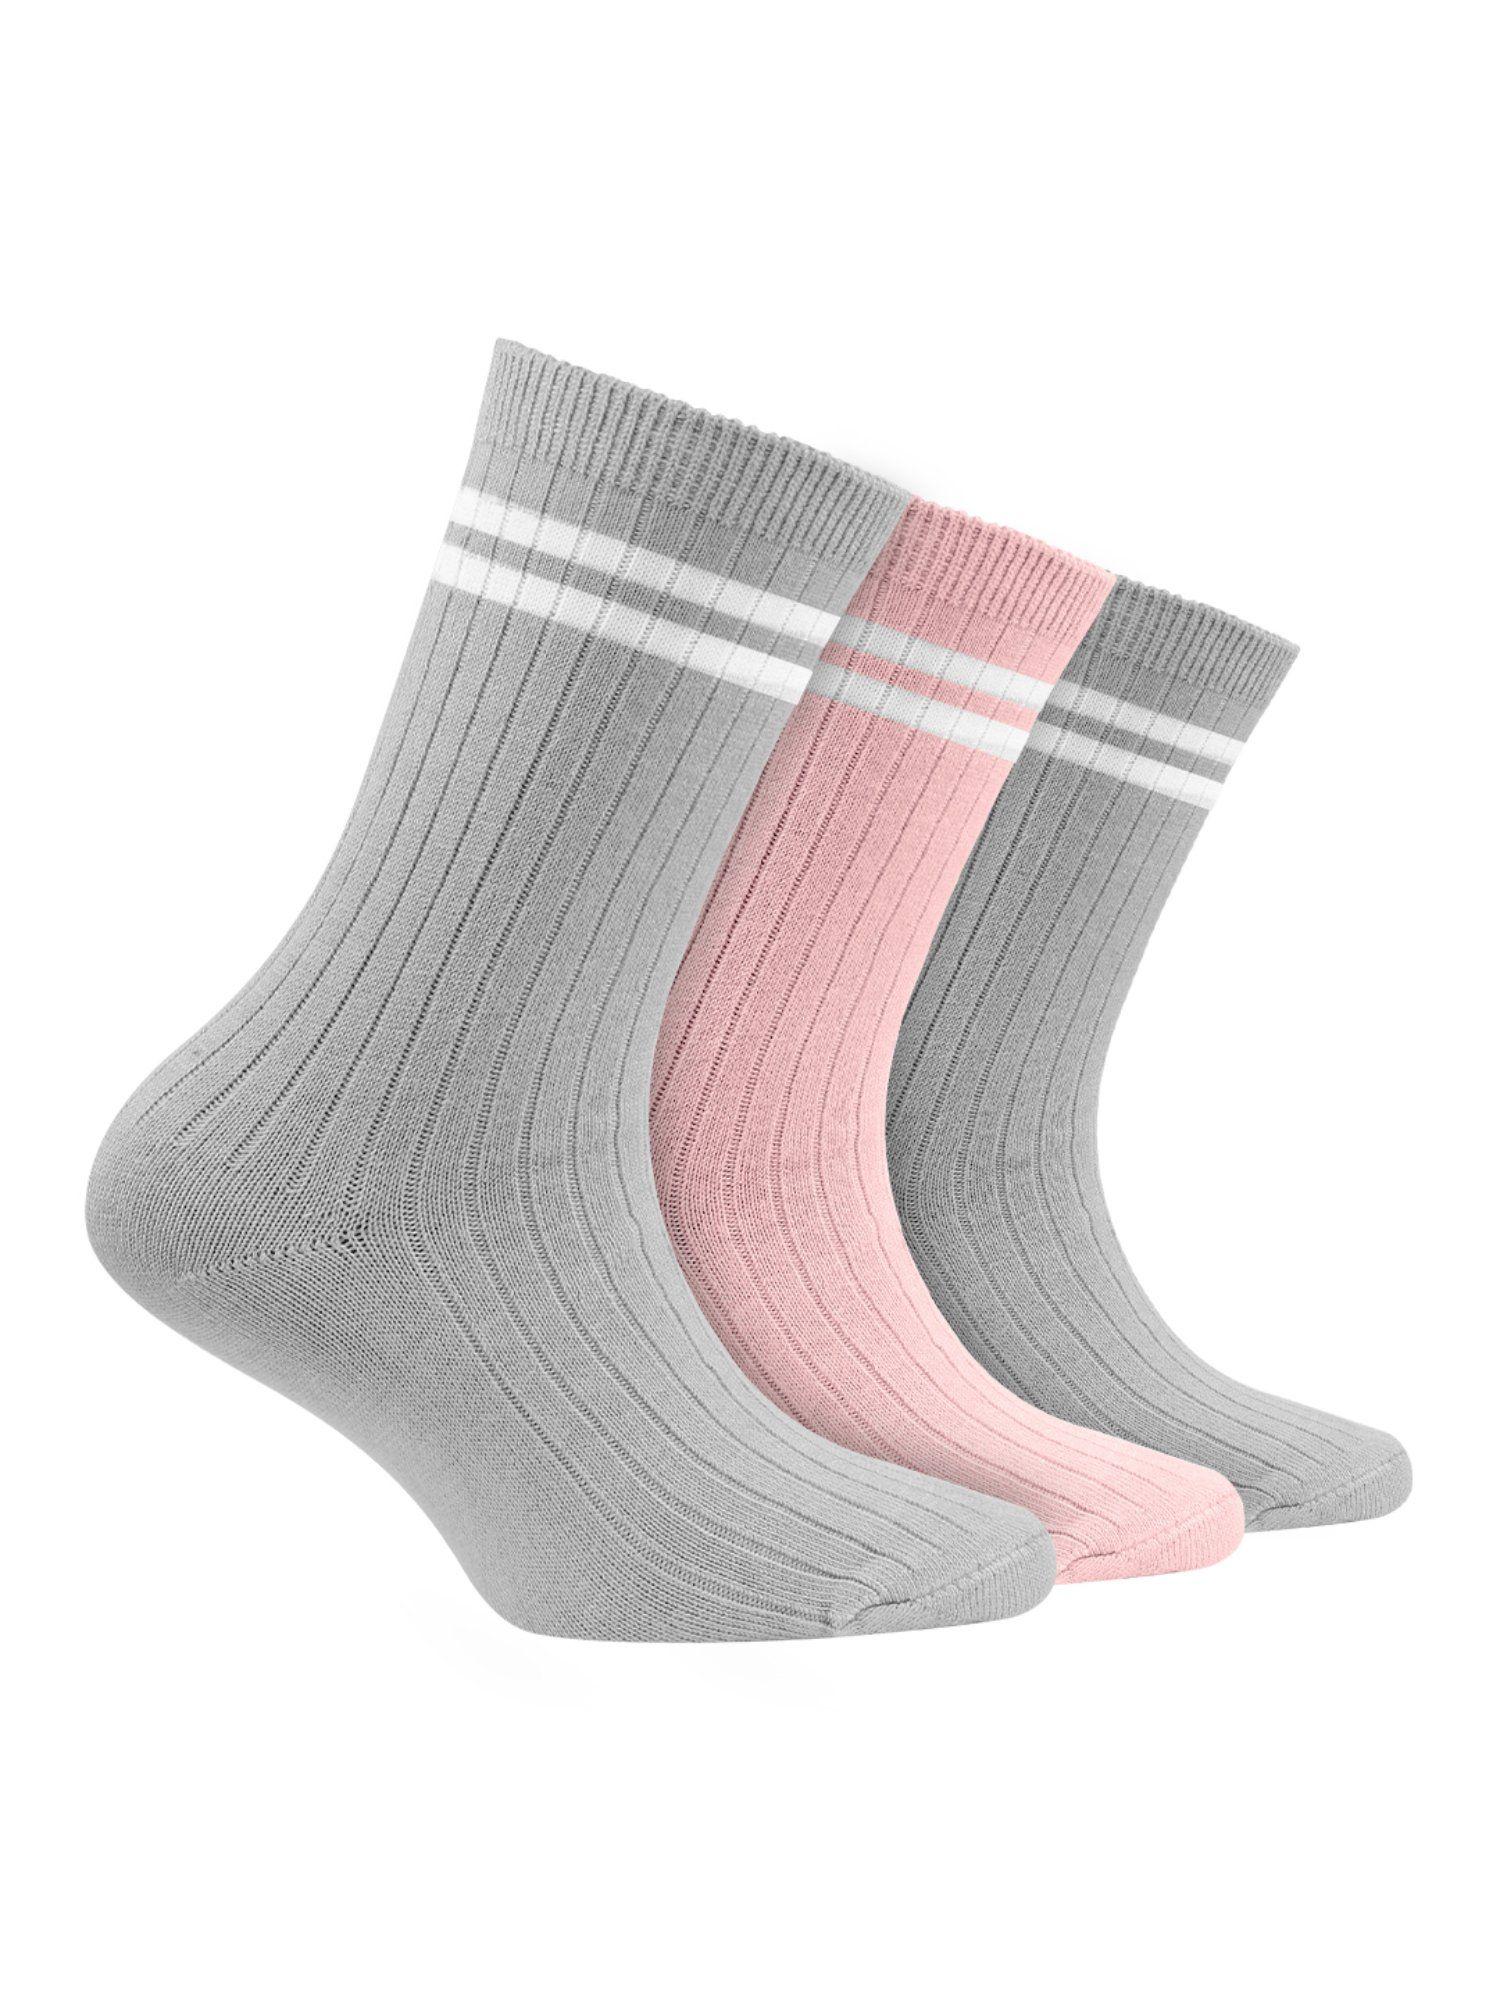 multi-color-oduor-free-organic-cotton-bamboo-kids-ribbed-socks-pack-of-3